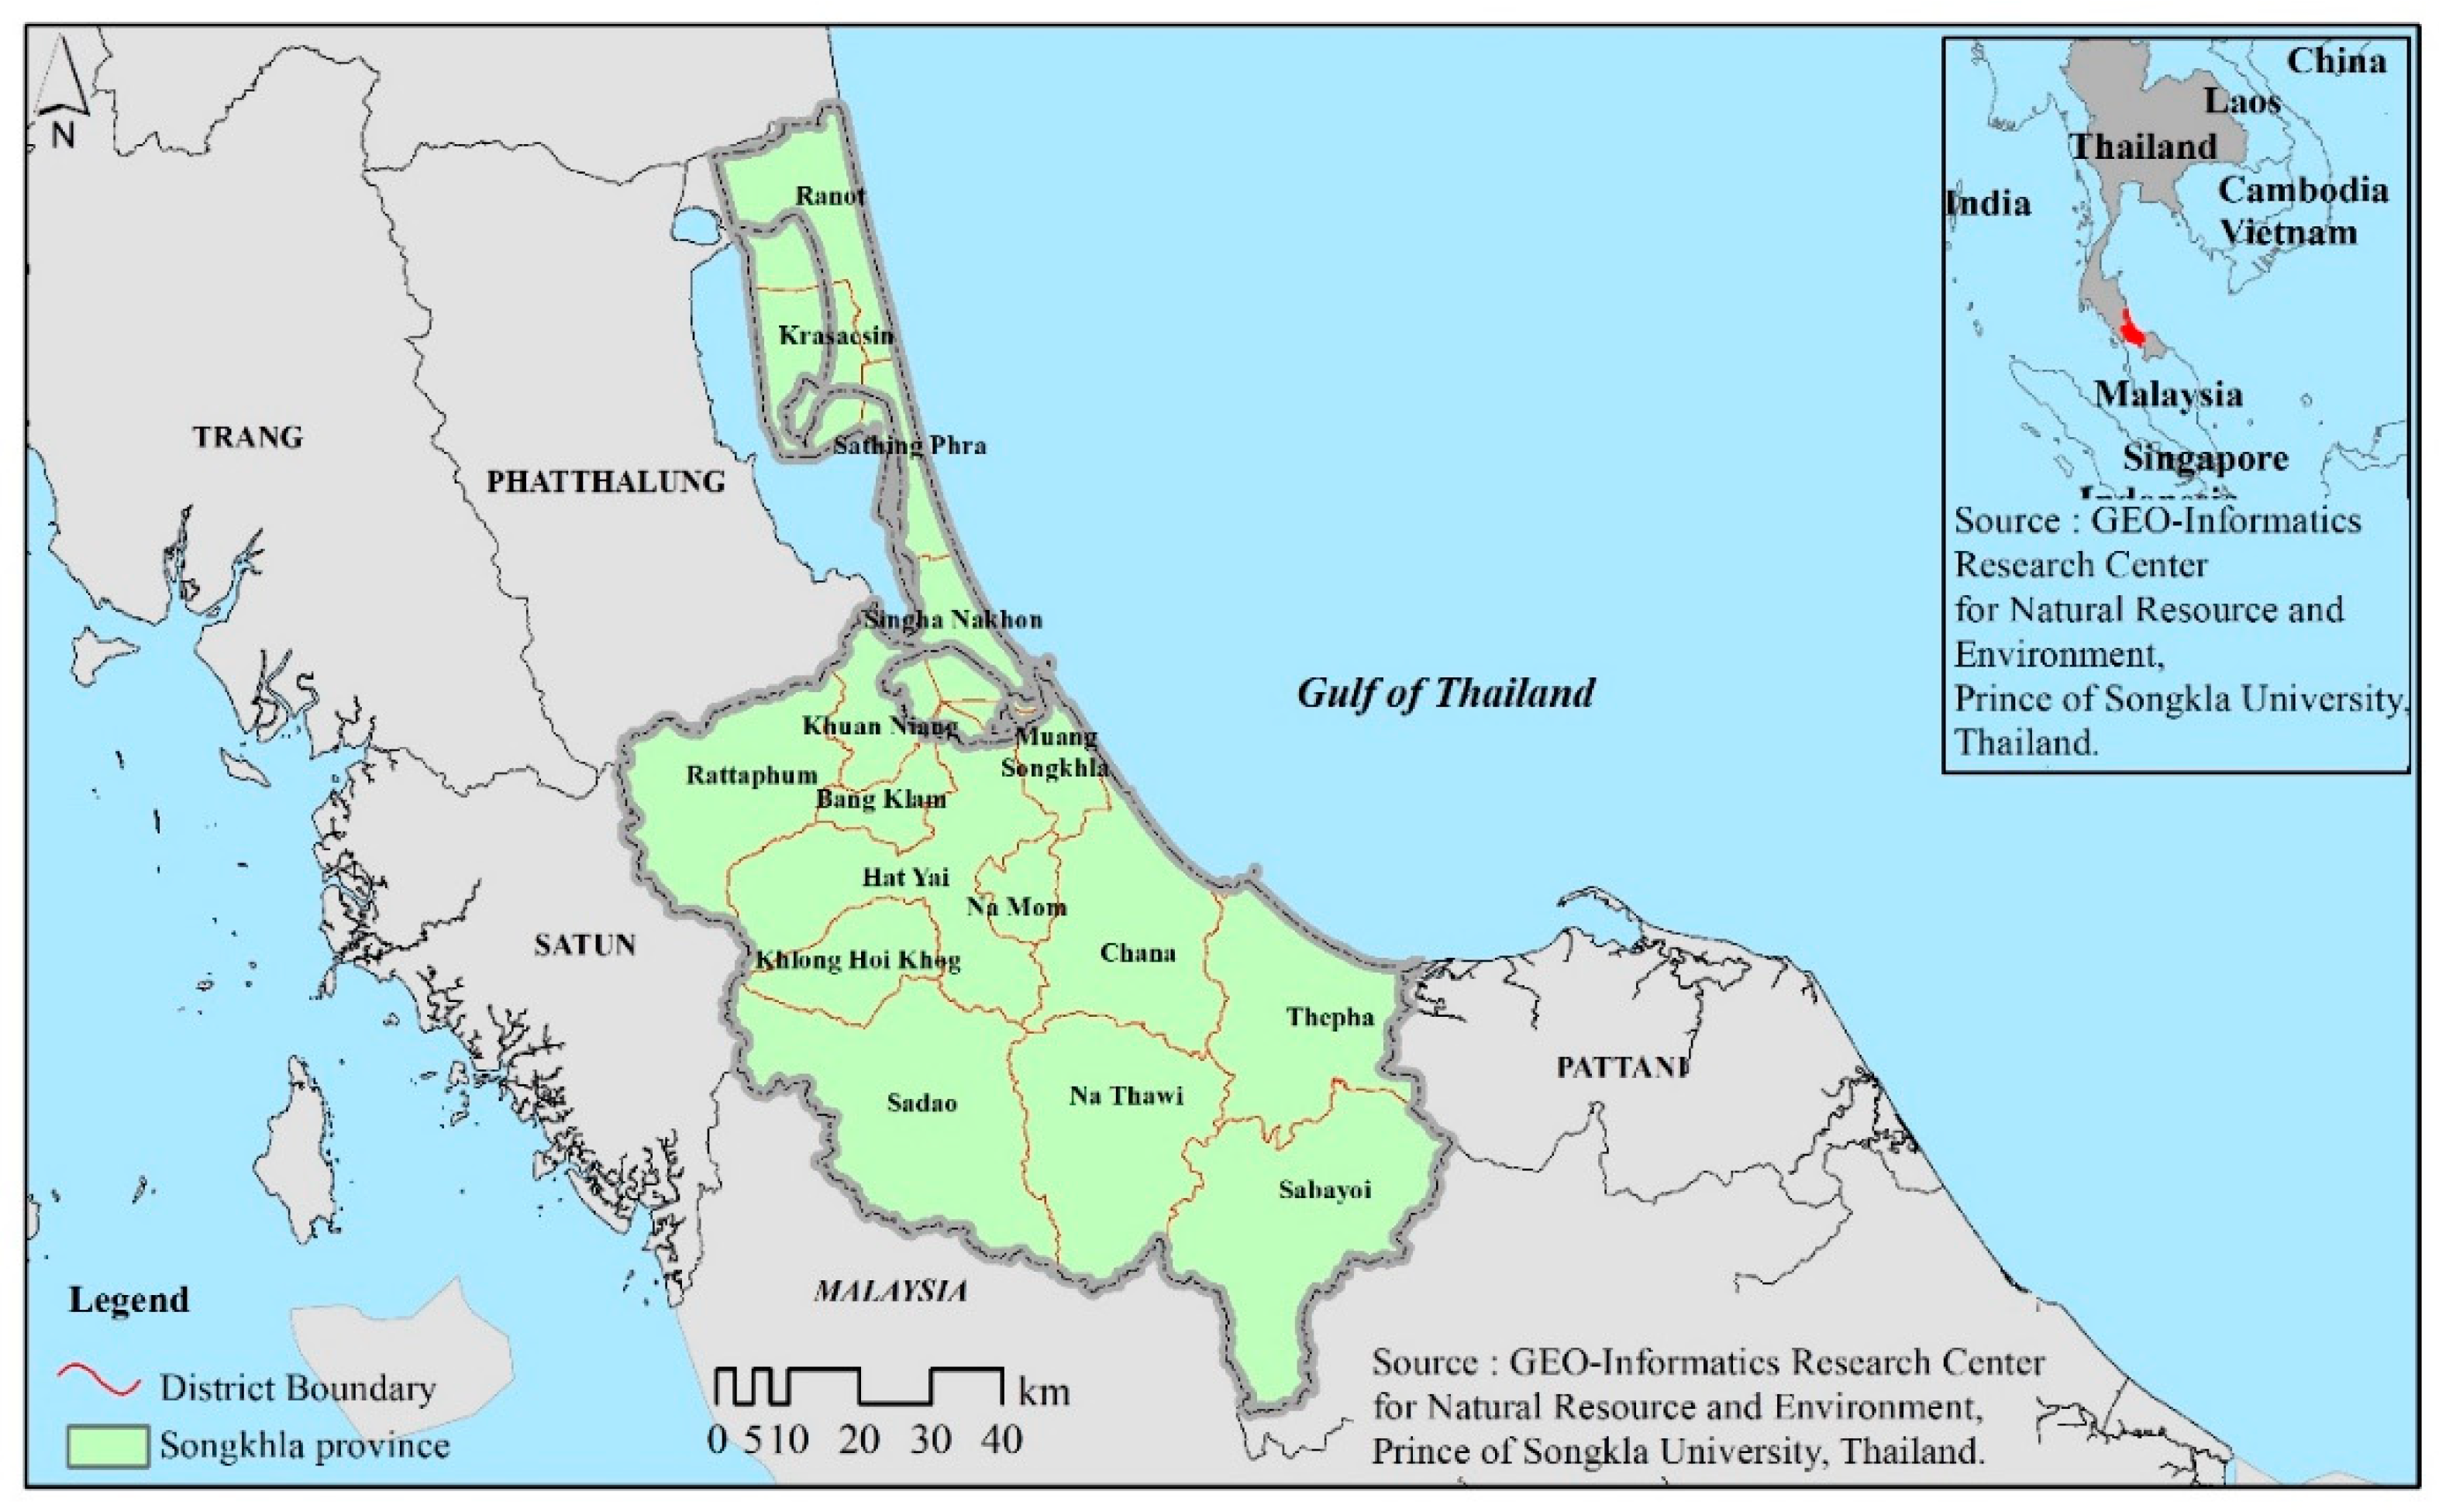 Sustainability | Free Full-Text | Spatial Assessment of Para Rubber above Ground Biomass Potentials in Songkhla Province, Southern Thailand | HTML